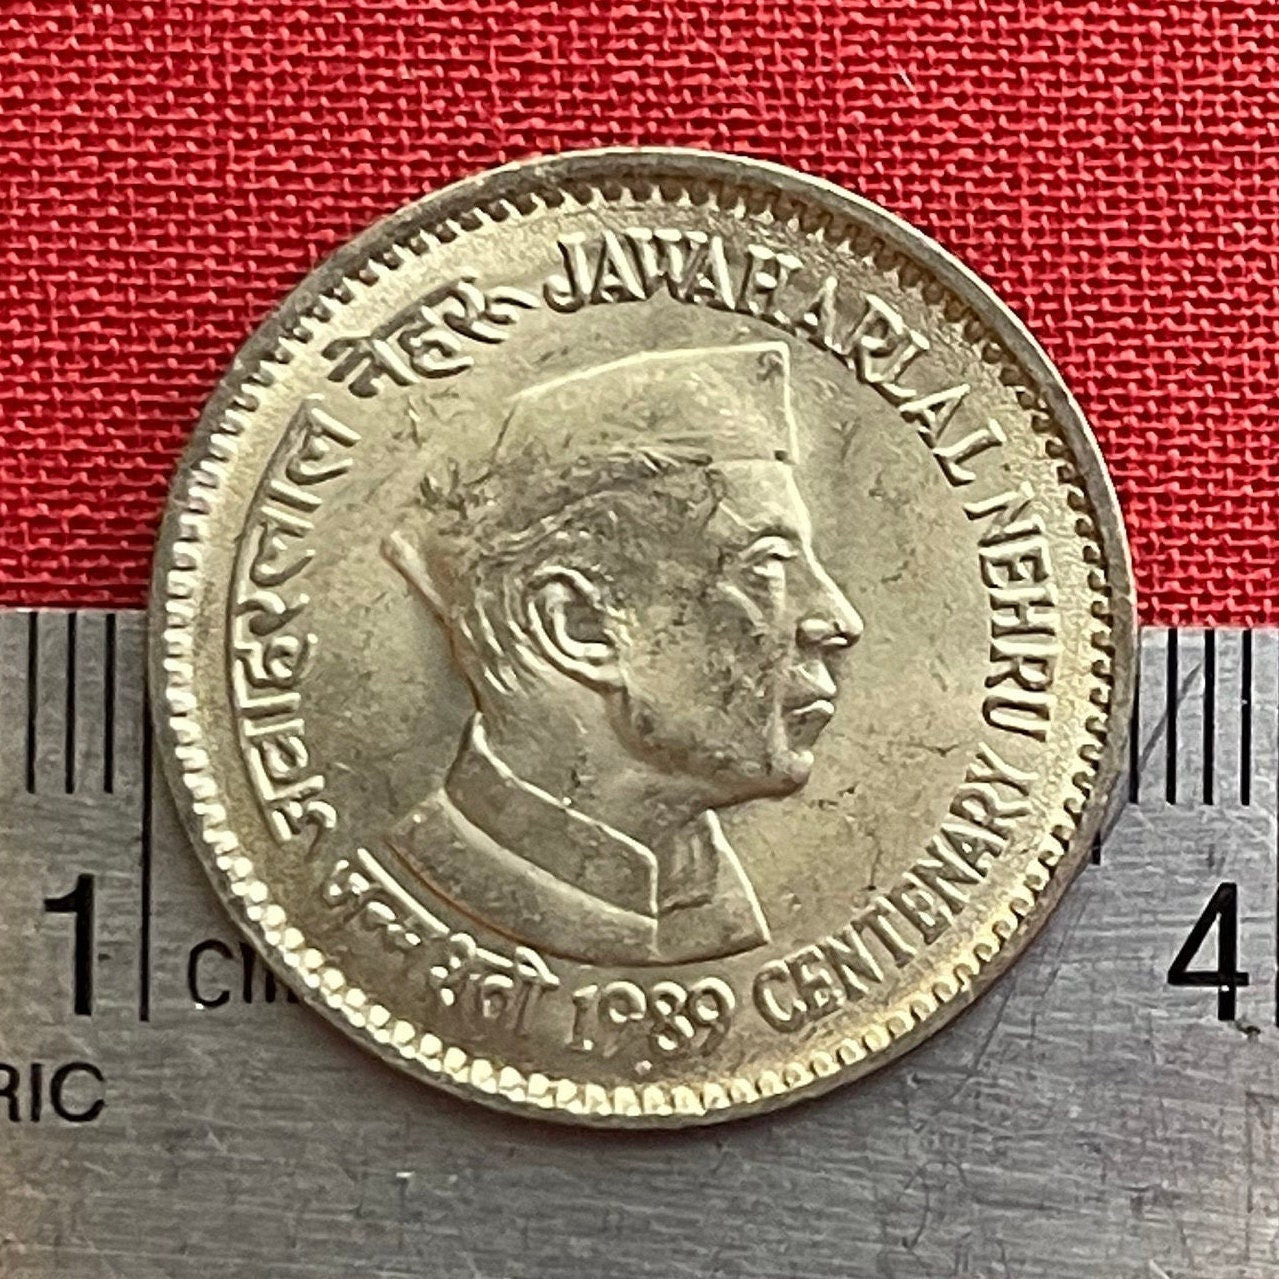 Jawaharlal Nehru & Ashoka Lion Capitol 1 Rupee Authentic Coin Money for Jewelry and Craft Making (1989) (Centenary)